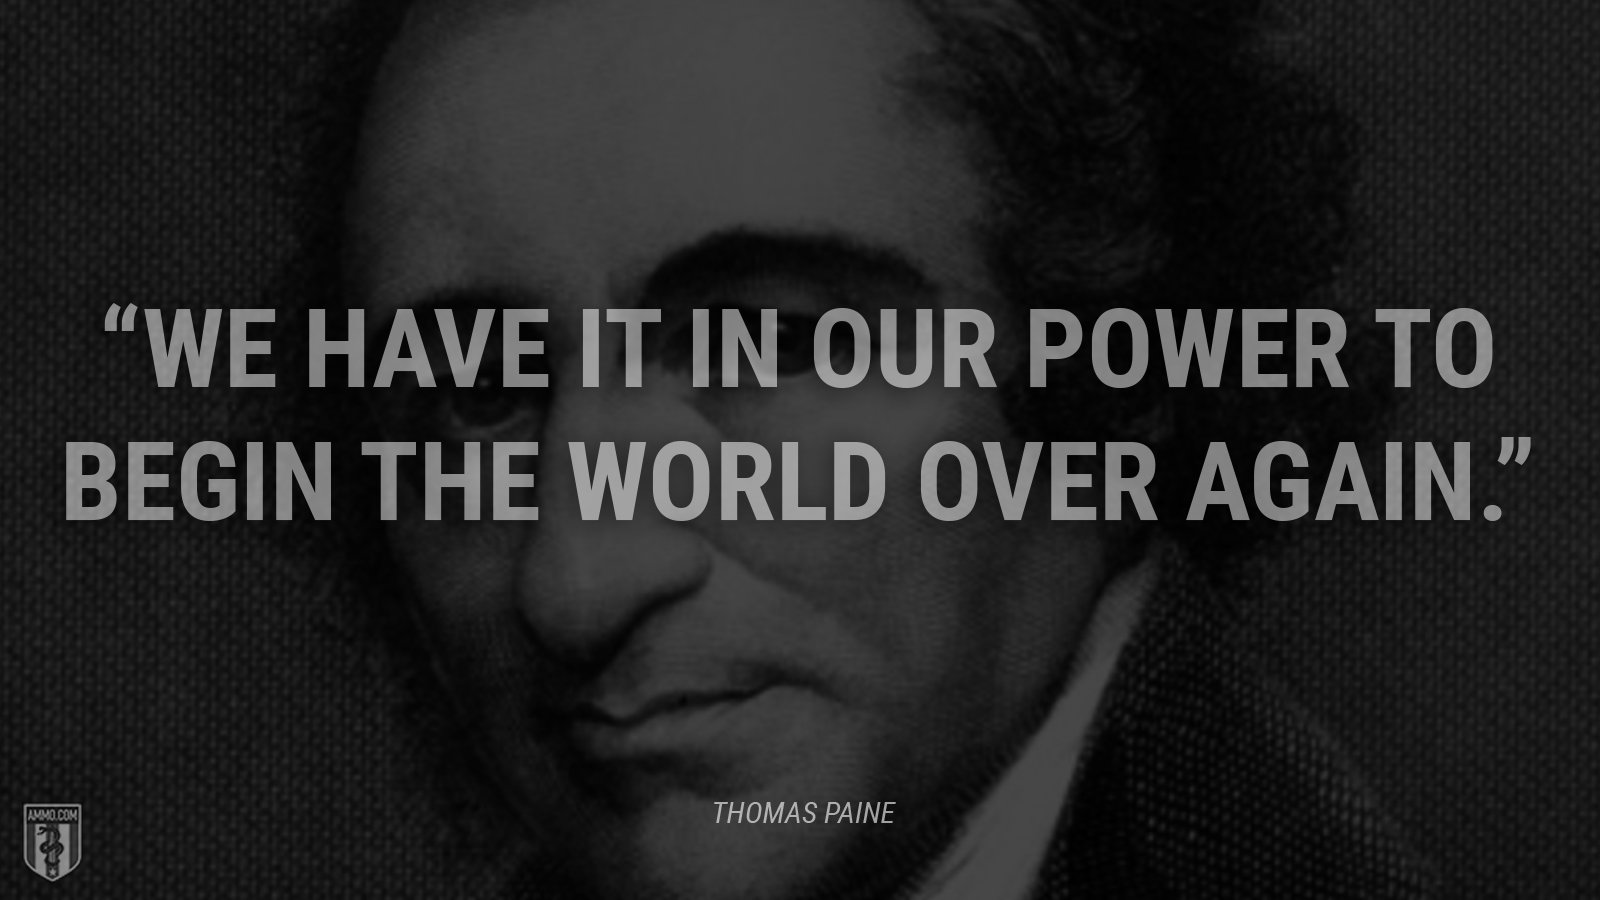 “We have it in our power to begin the world over again.” - Thomas Paine